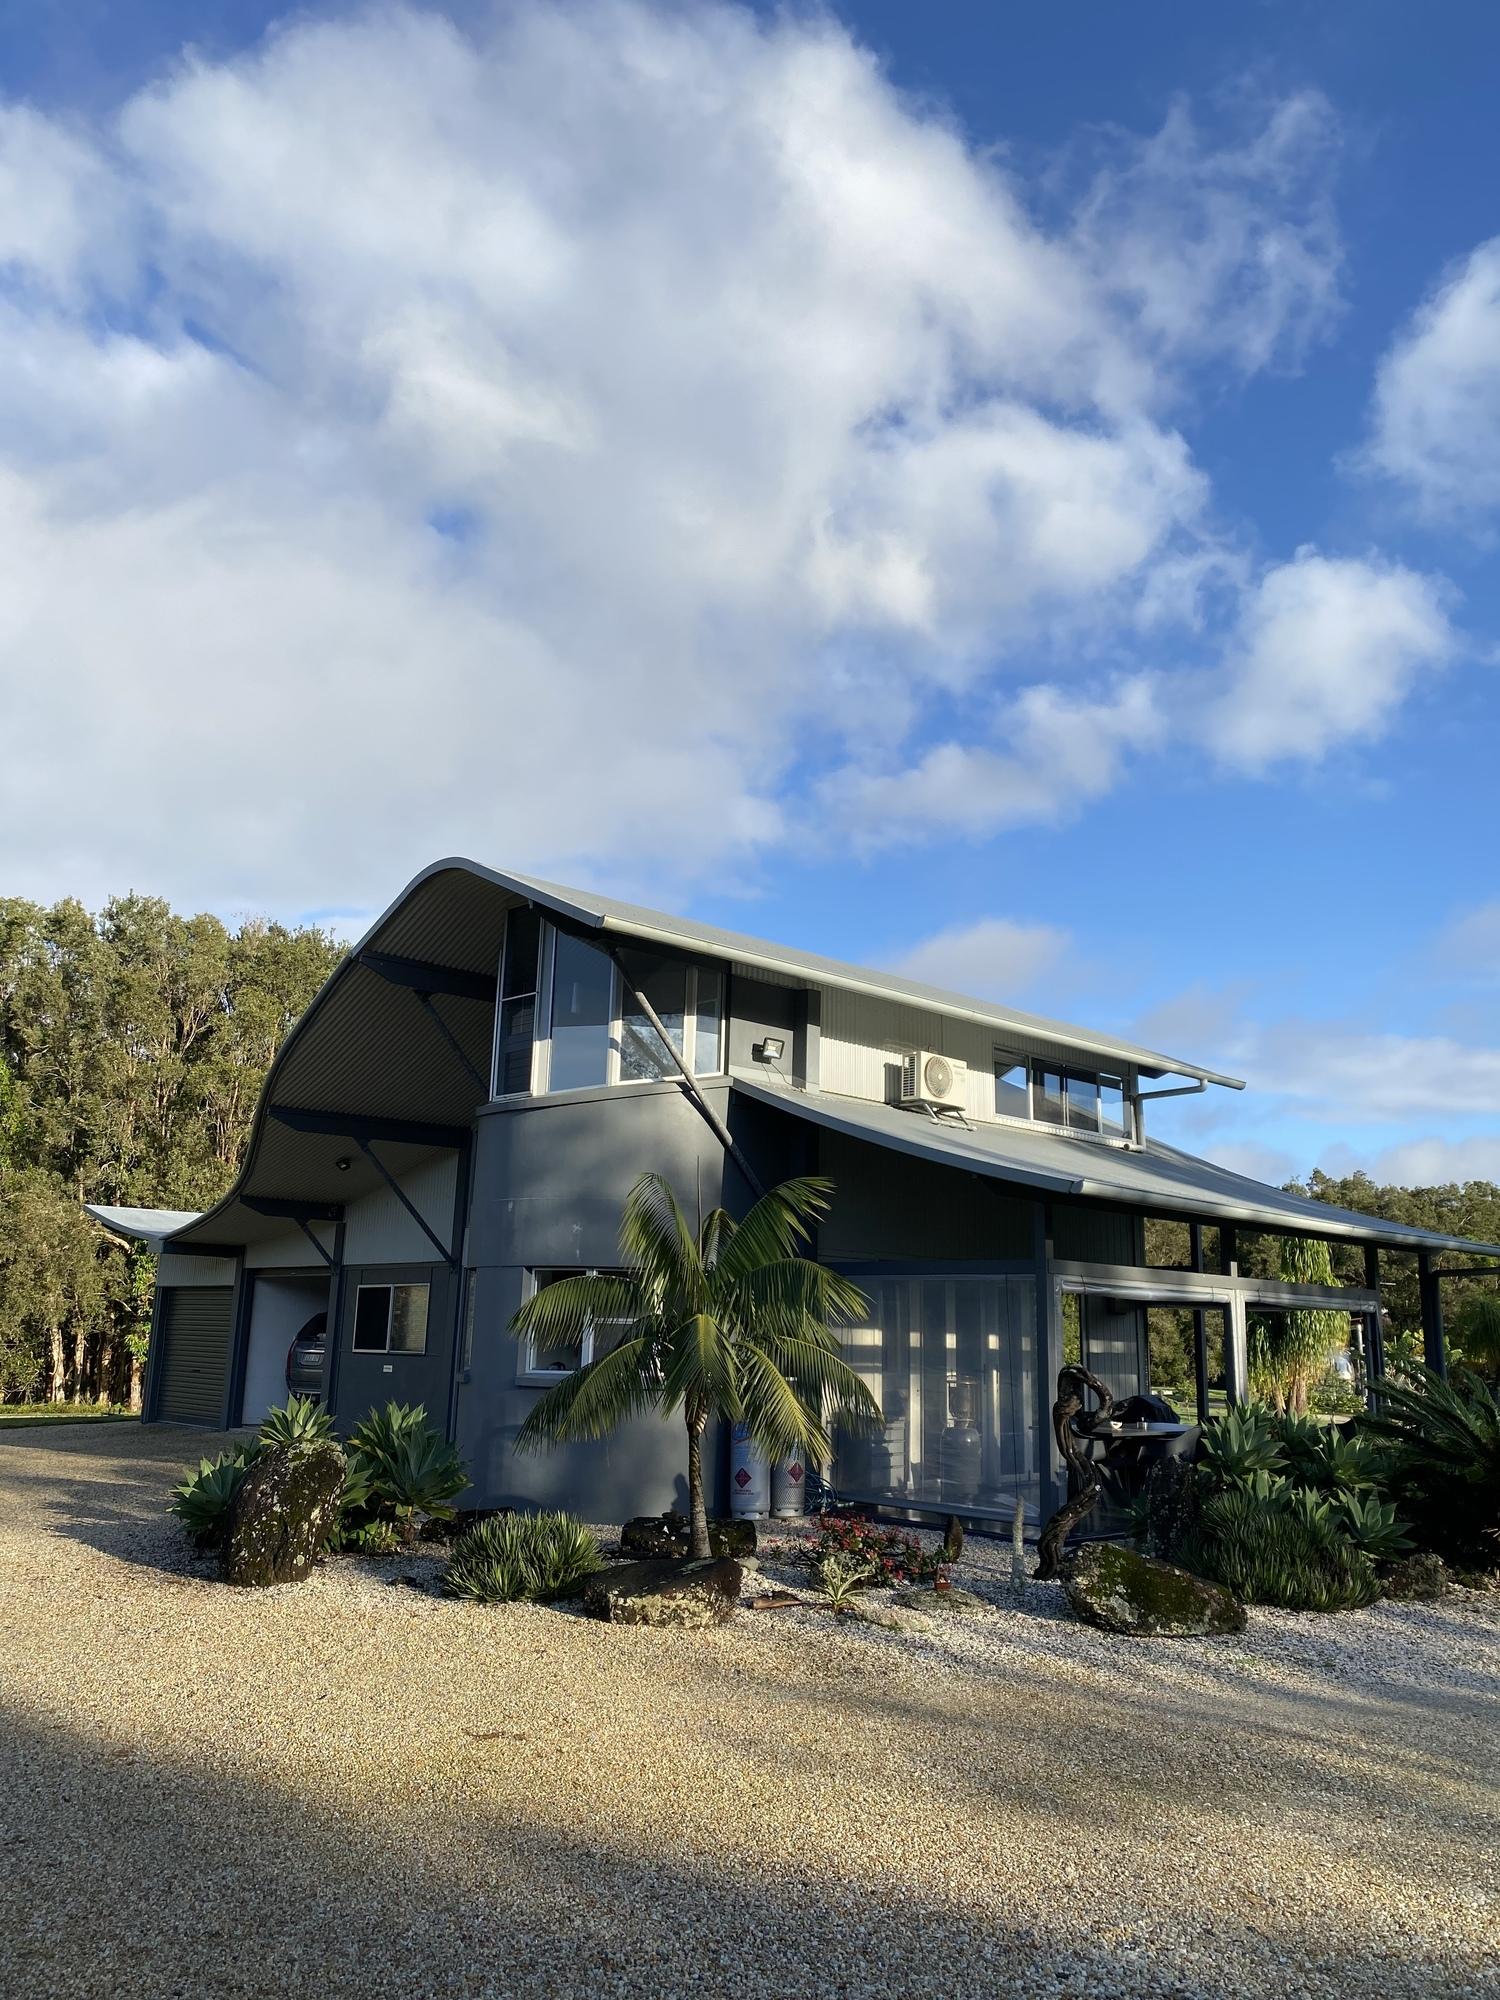 Tom from Byron Bay, NSW loves COLORBOND® steel, Roofing, Guttering & Fascia, Garage Doors, Walling, Fencing made from COLORBOND® steel in colours Shale Grey®, Surfmist® and Windspray®